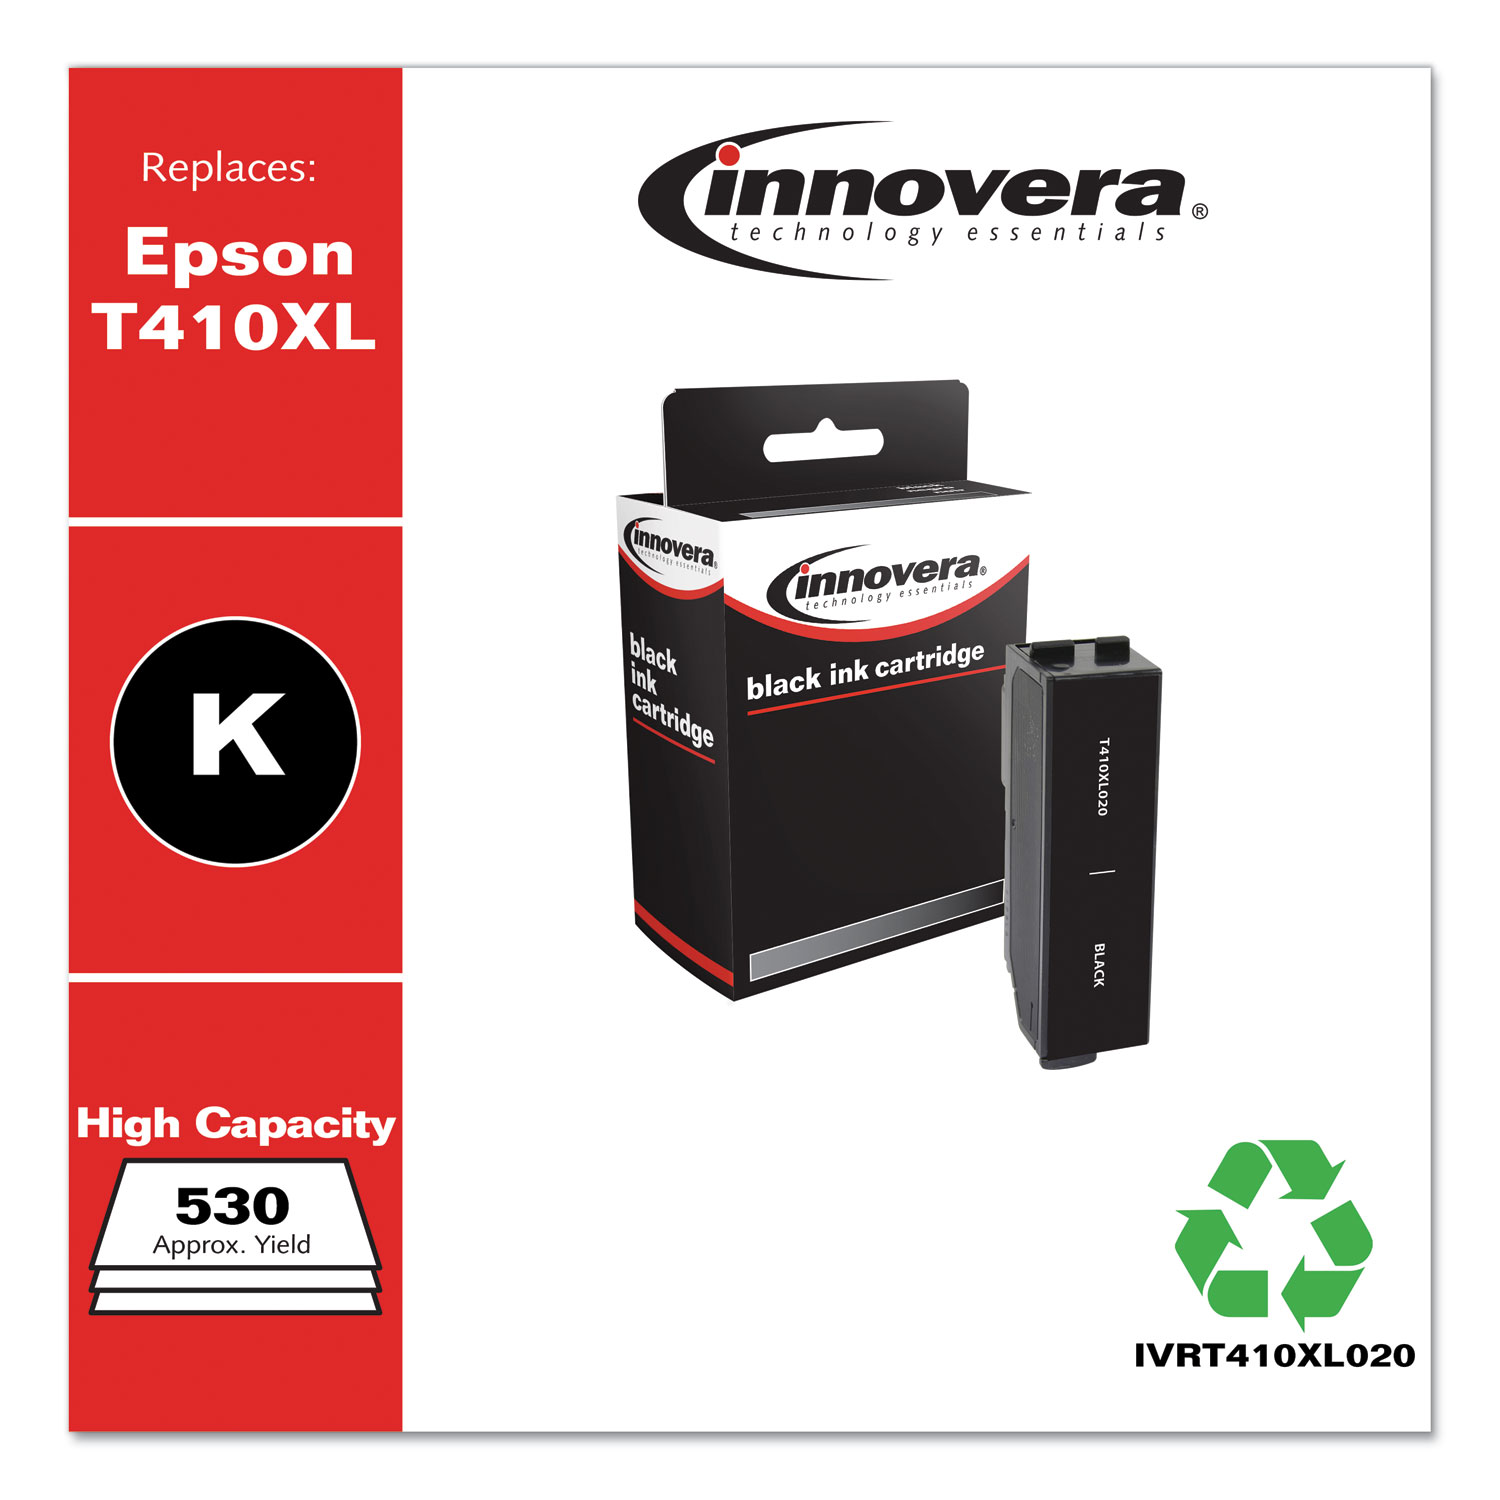  Innovera IVRT410XL020 Remanufactured Black High-Yield Ink, Replacement for Epson T410XL (T410XL020), 530 Page-Yield (IVRT410XL020) 